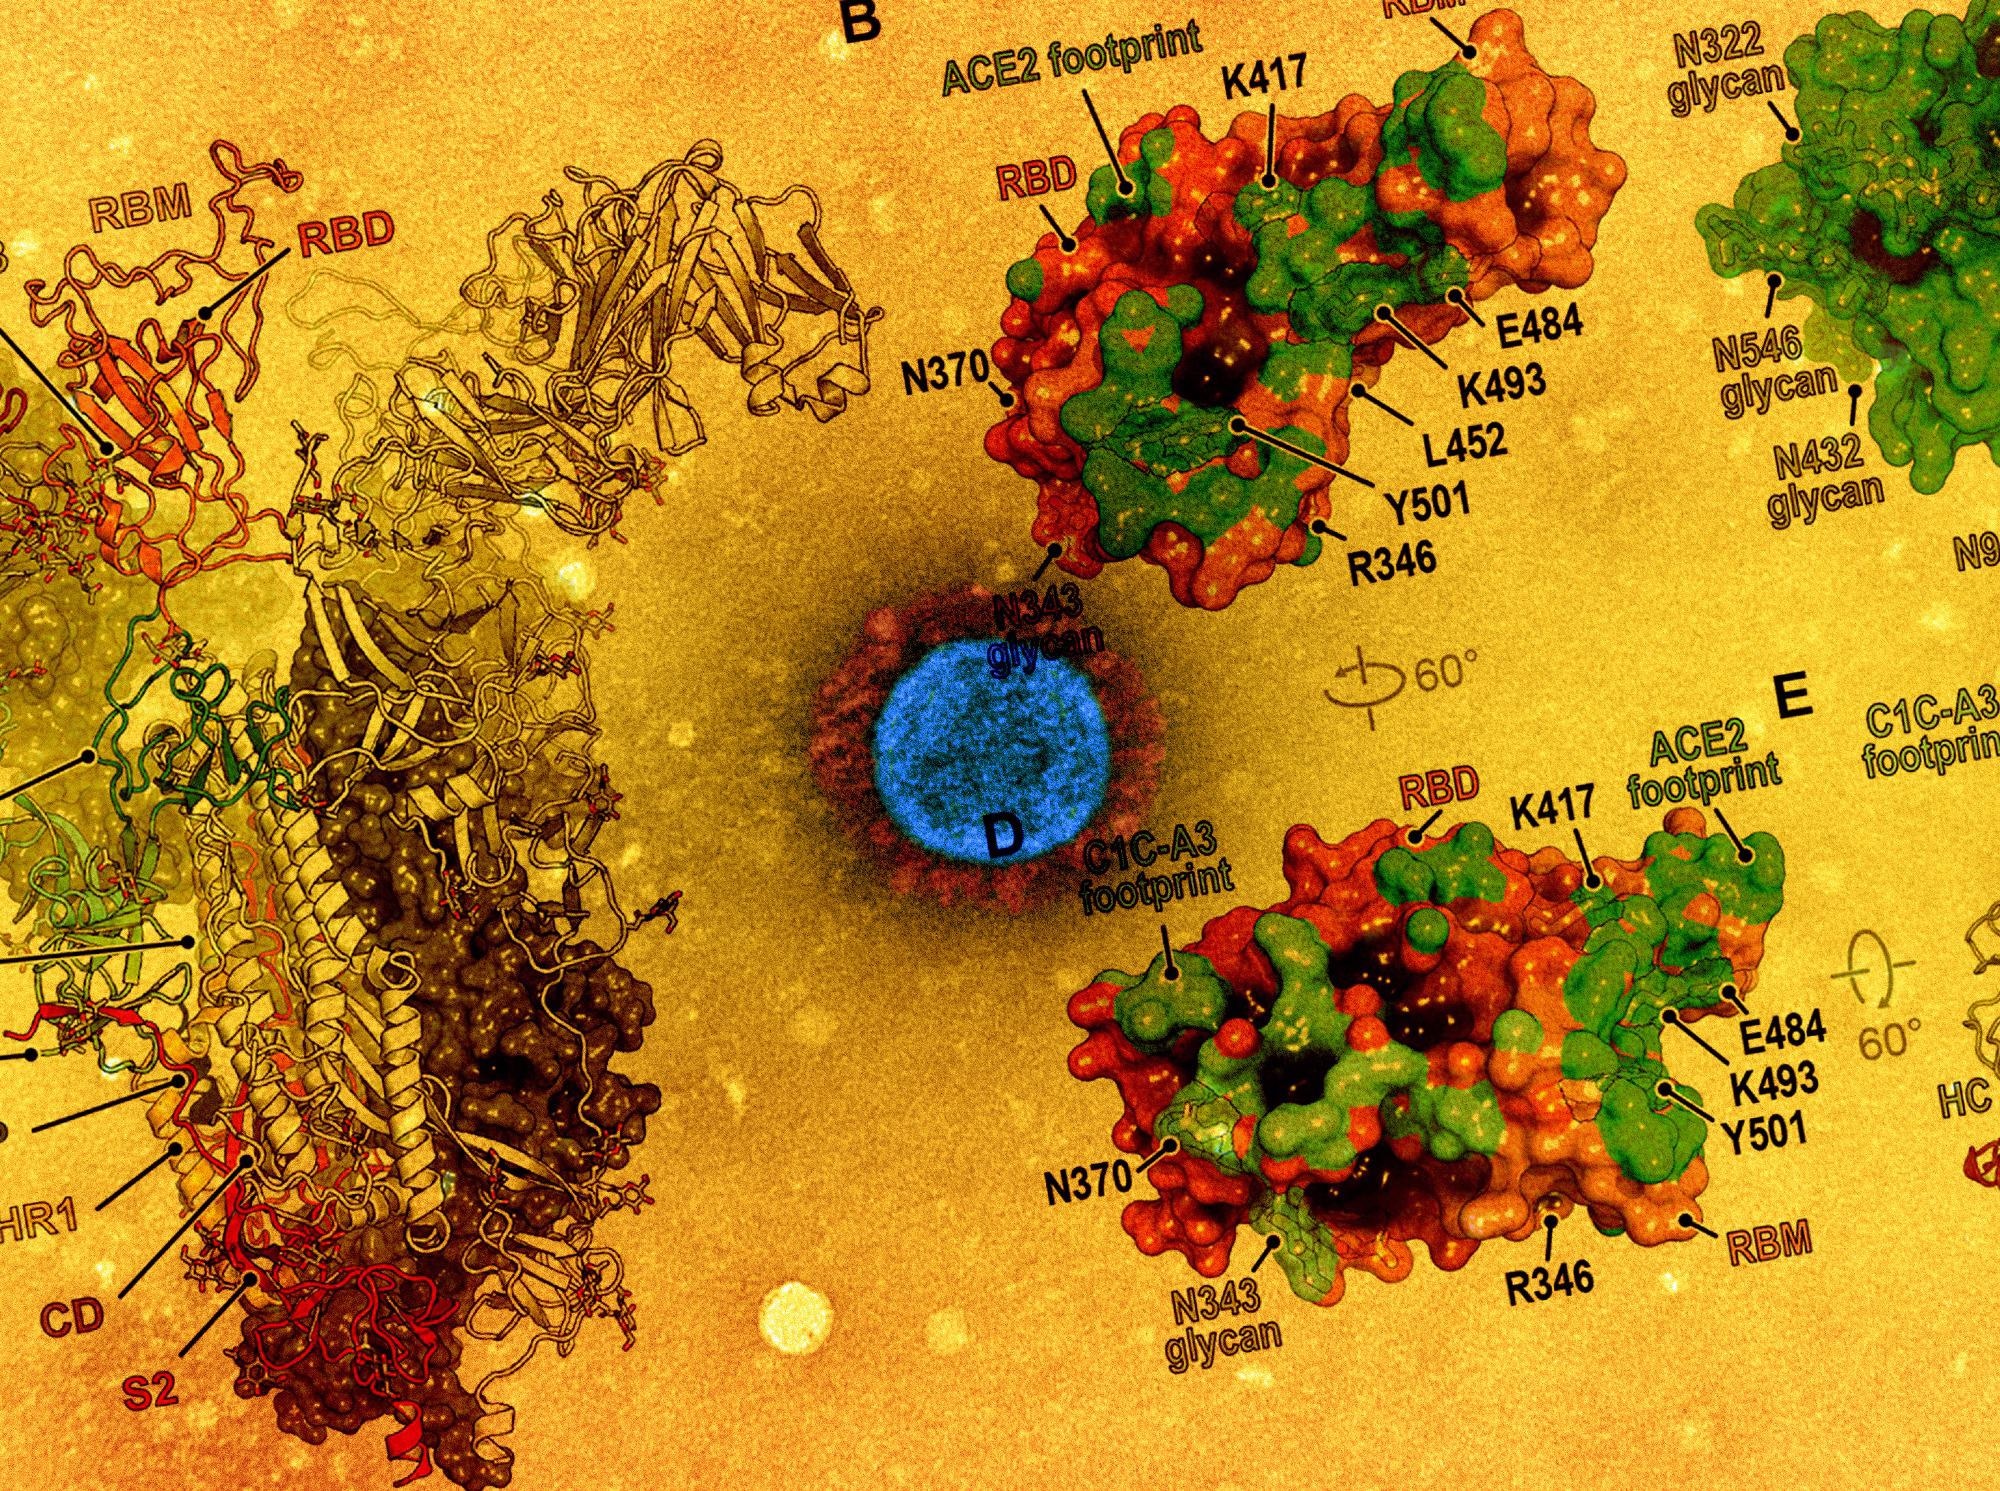 Study: Structural basis for continued antibody evasion by the SARS-CoV-2 receptor binding domain. Image Credit: NIAID and American Association for the Advancement of Science